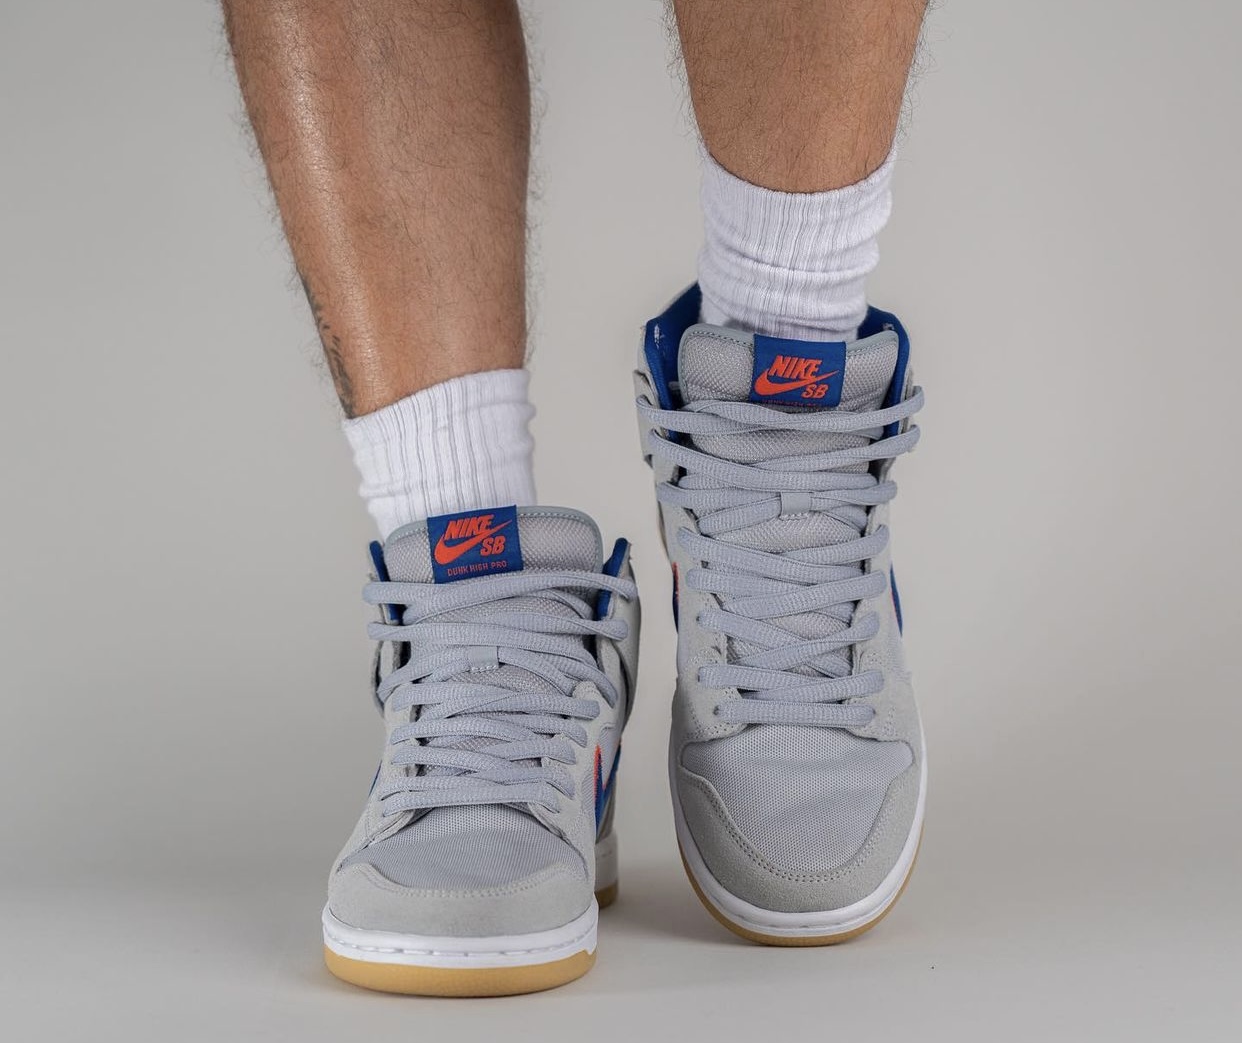 Nike SB Dunk High New York Mets DH7155-001 Release Date On-Feet